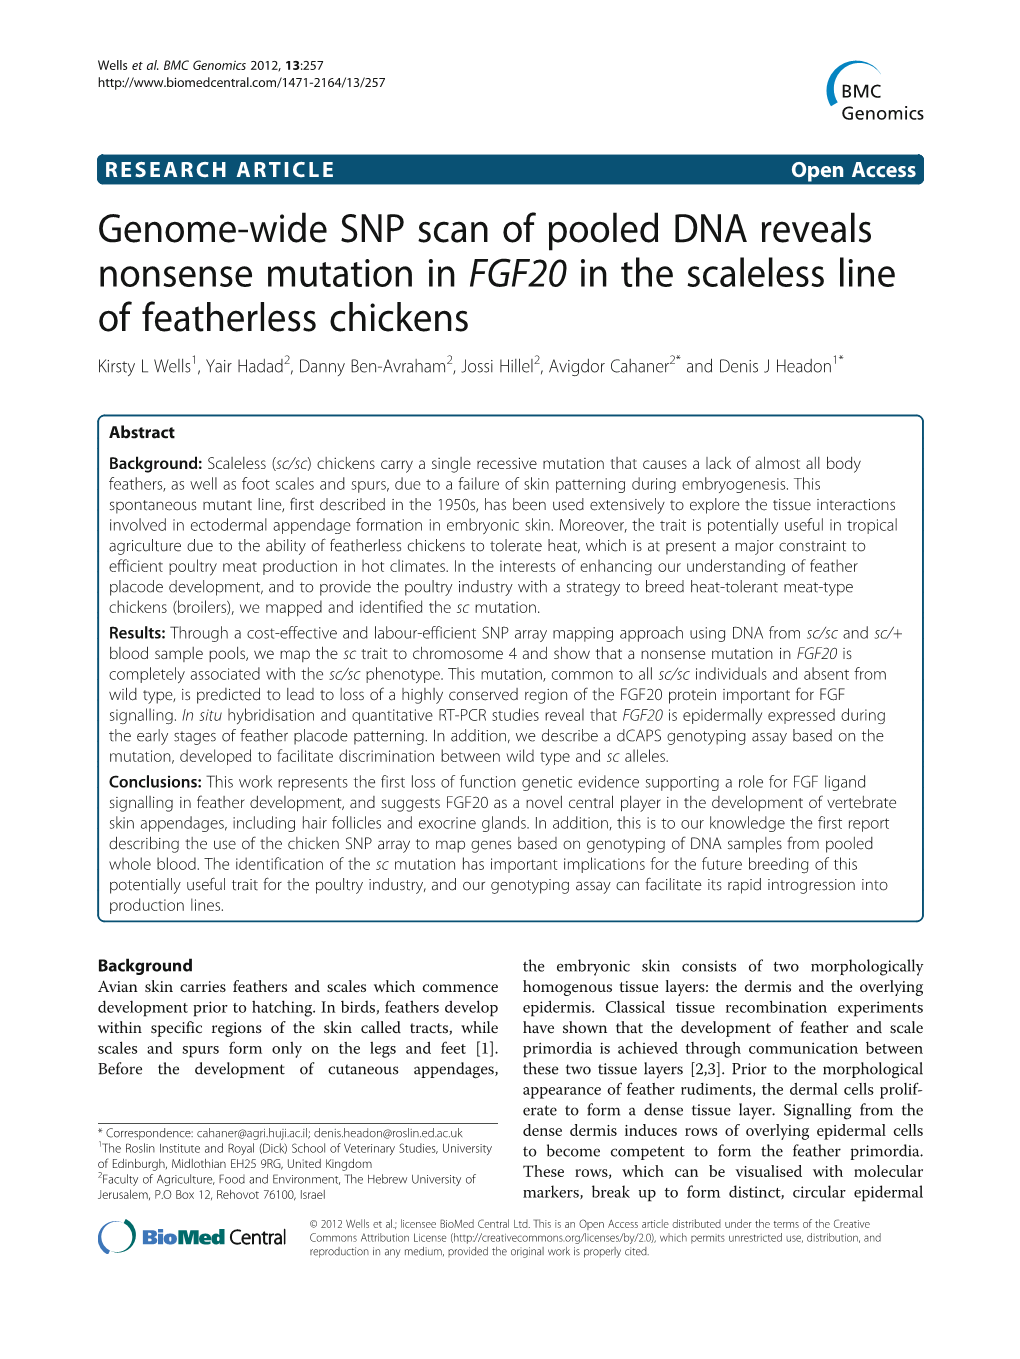 Genome-Wide SNP Scan of Pooled DNA Reveals